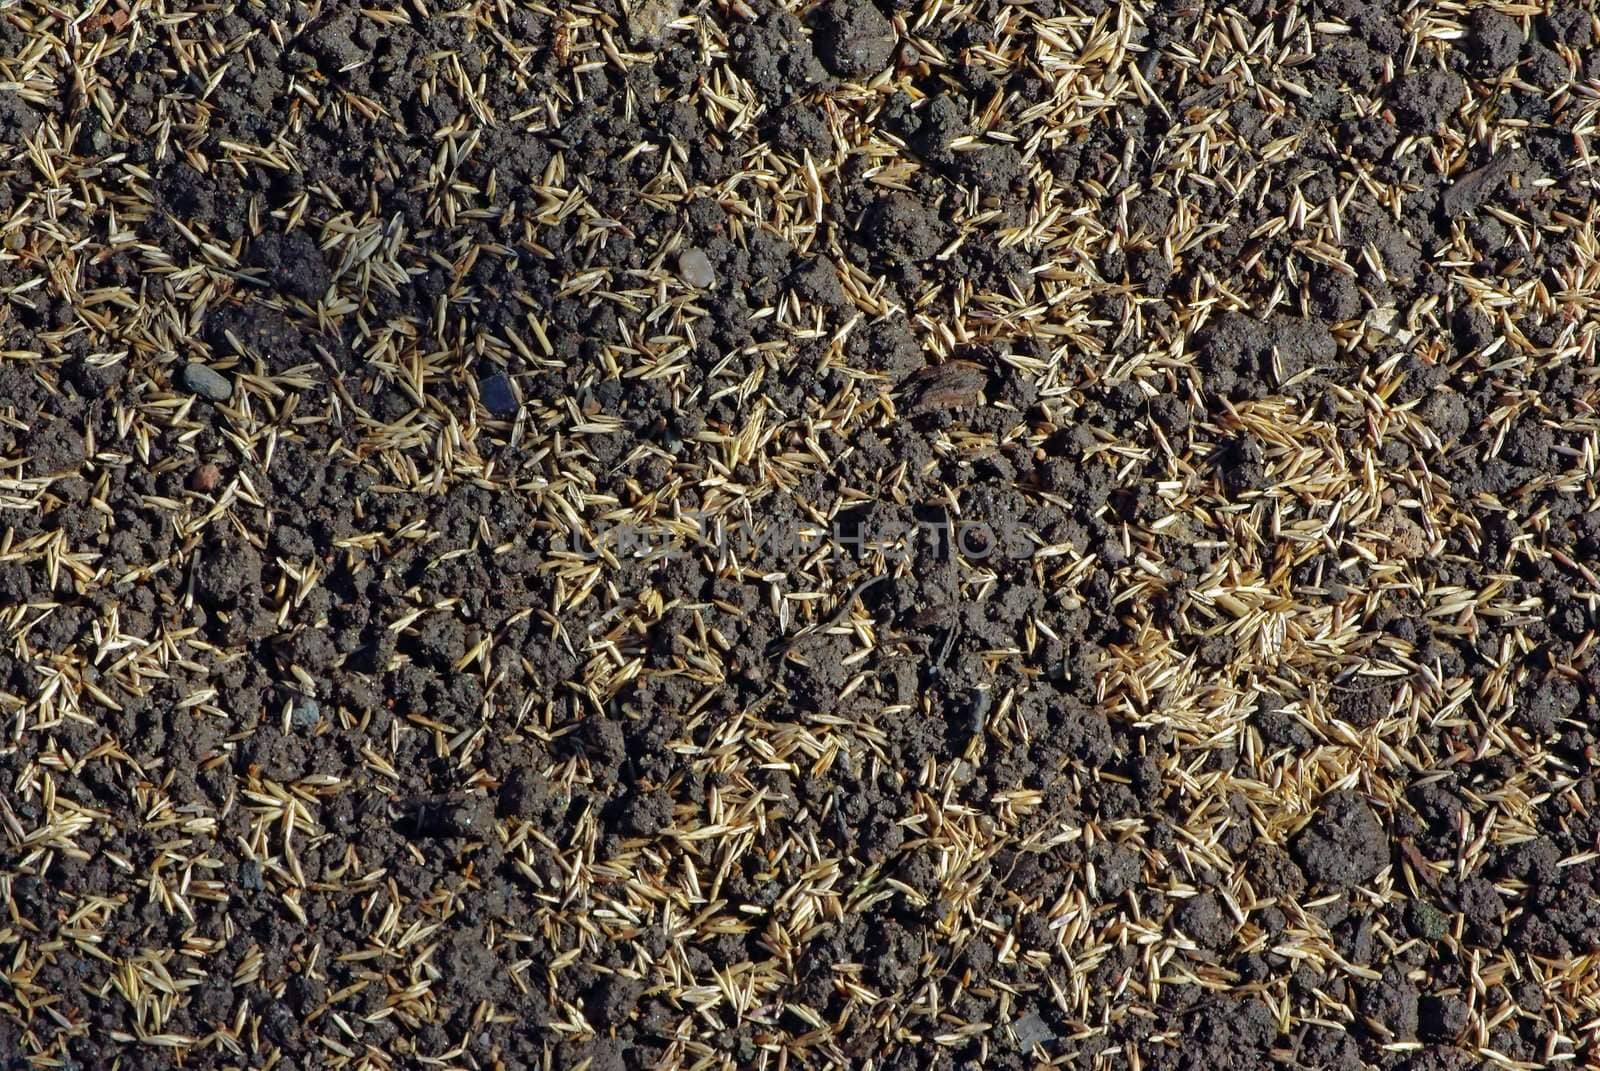 Seeds of lawn grass on the soil by Vitamin